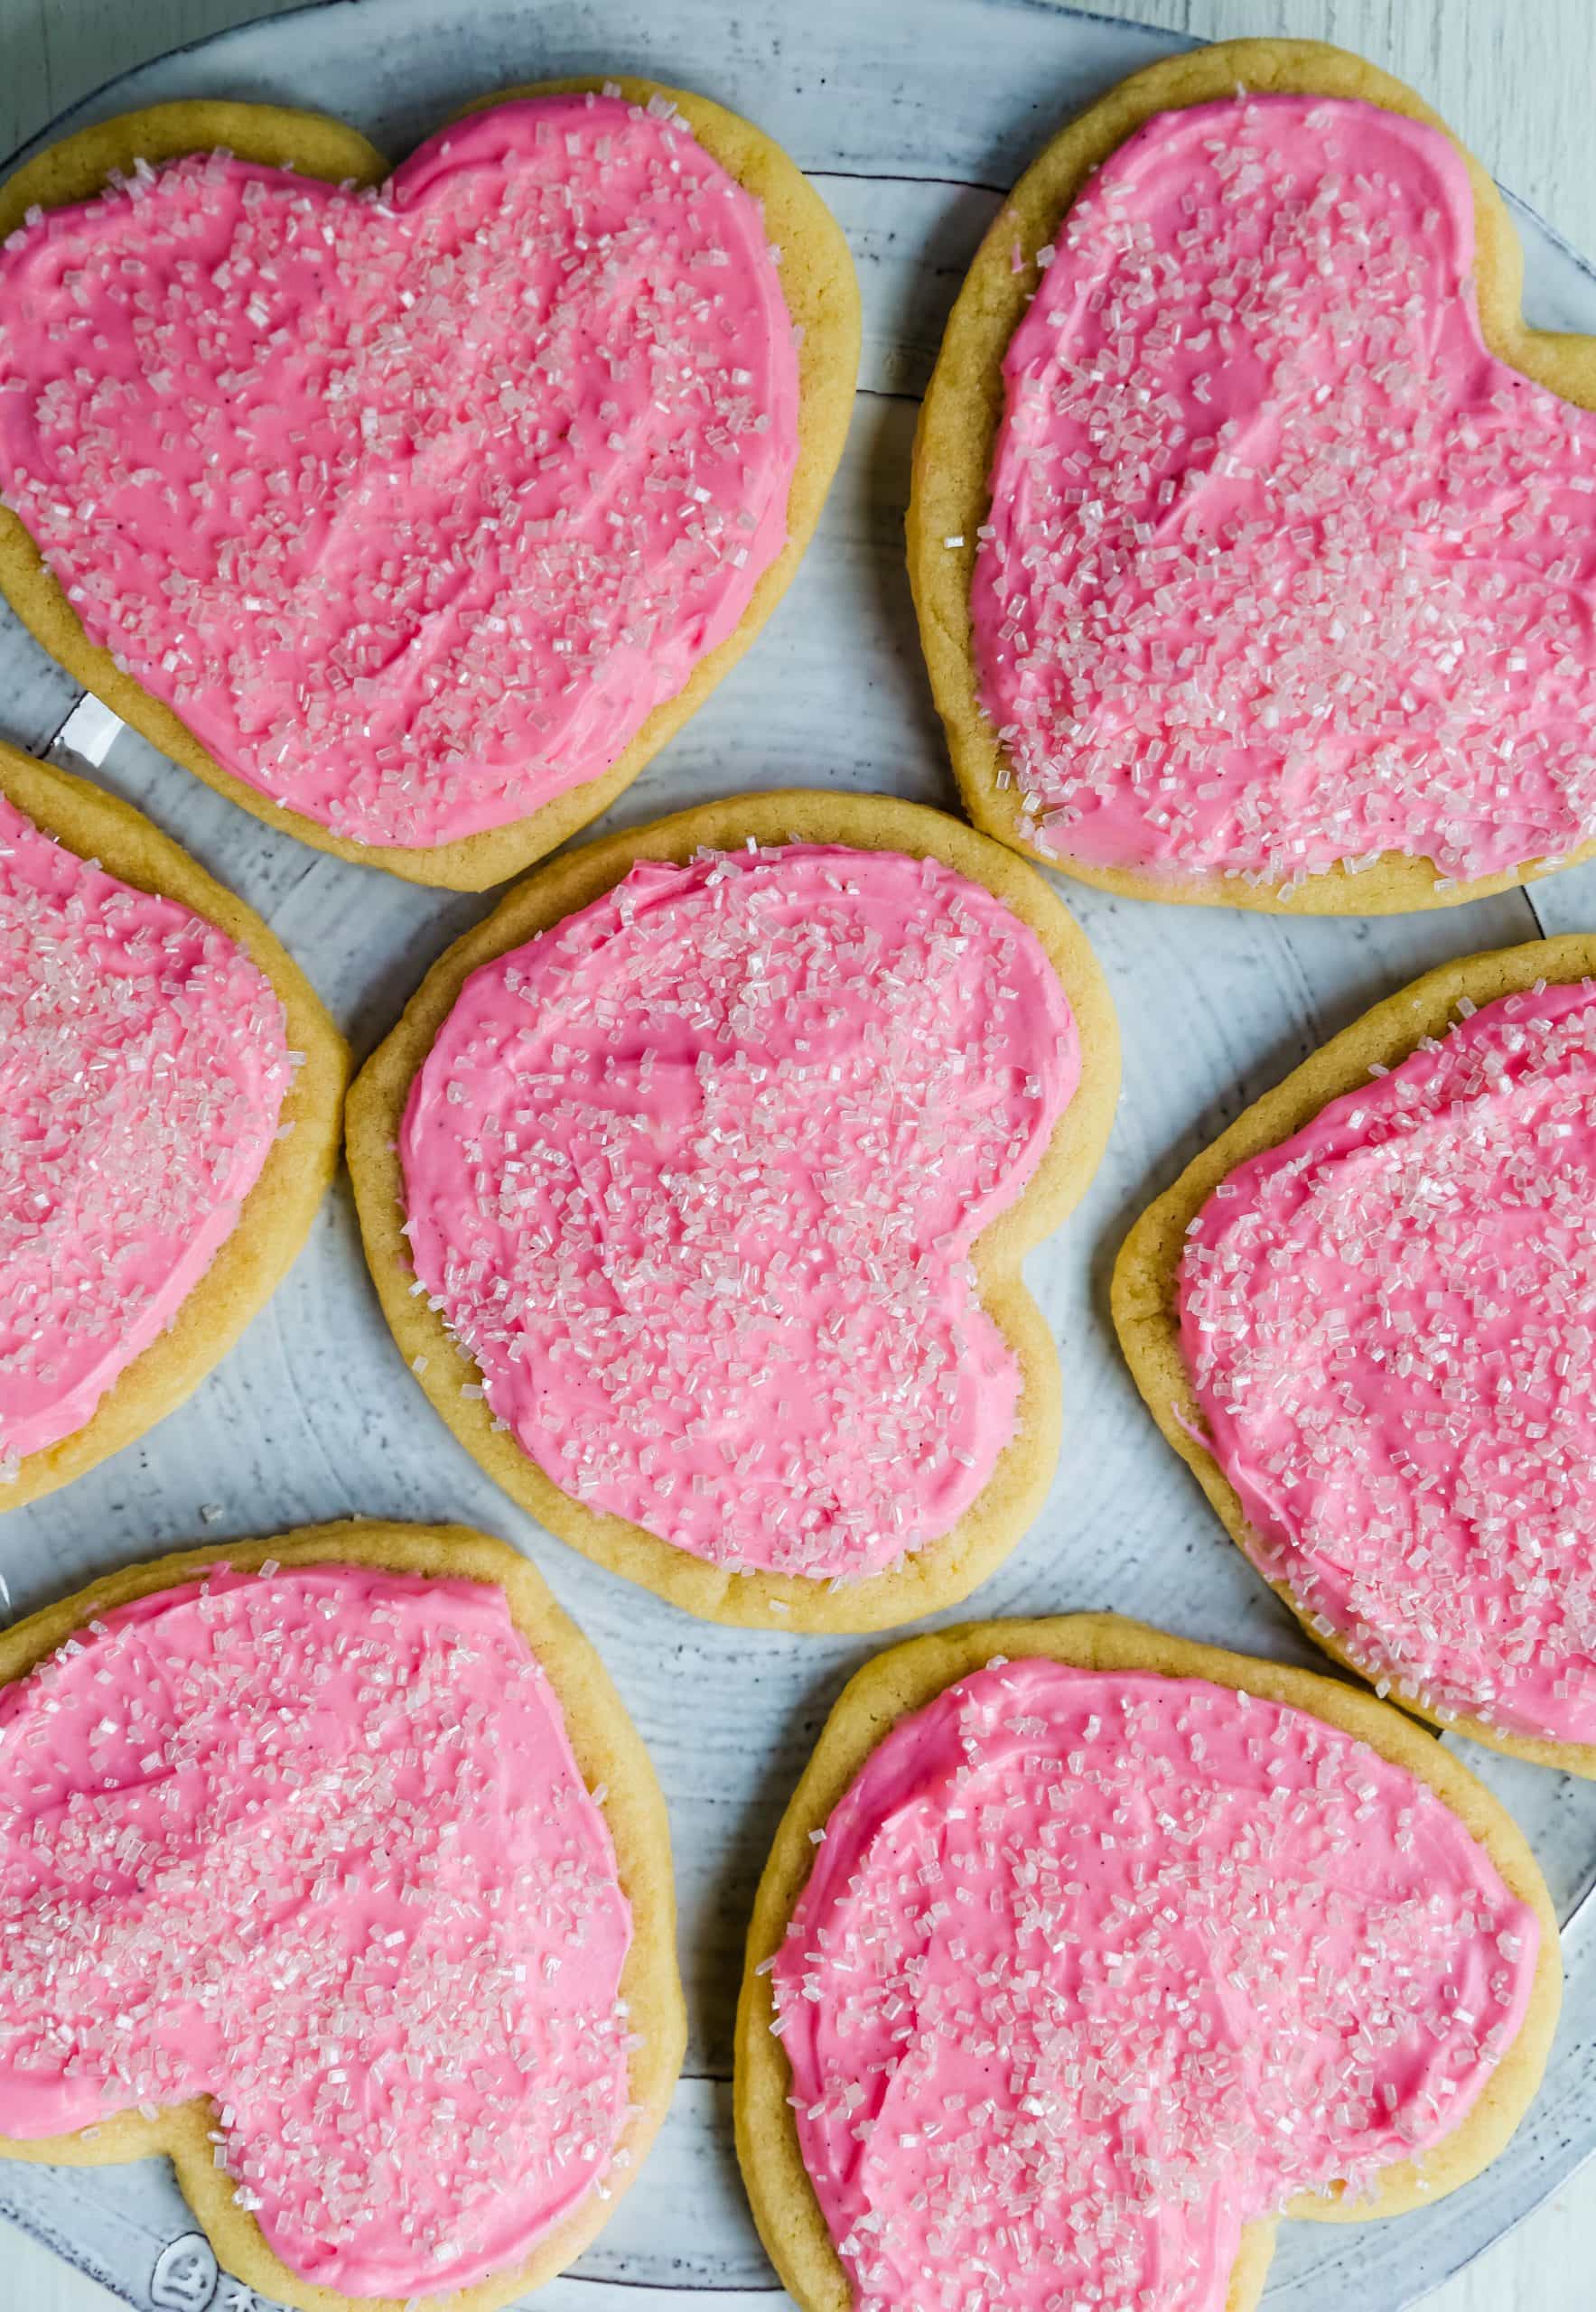 Jacque's Buttery Sugar Cookies. Homemade buttery sugar cookies with sweet buttercream frosting. The perfect frosted sugar cookie recipe! www.modernhoney.com #sugarcookies #buttercookies #buttersugarcookies #heartcookies #valentinesday #valentinesdaycookies